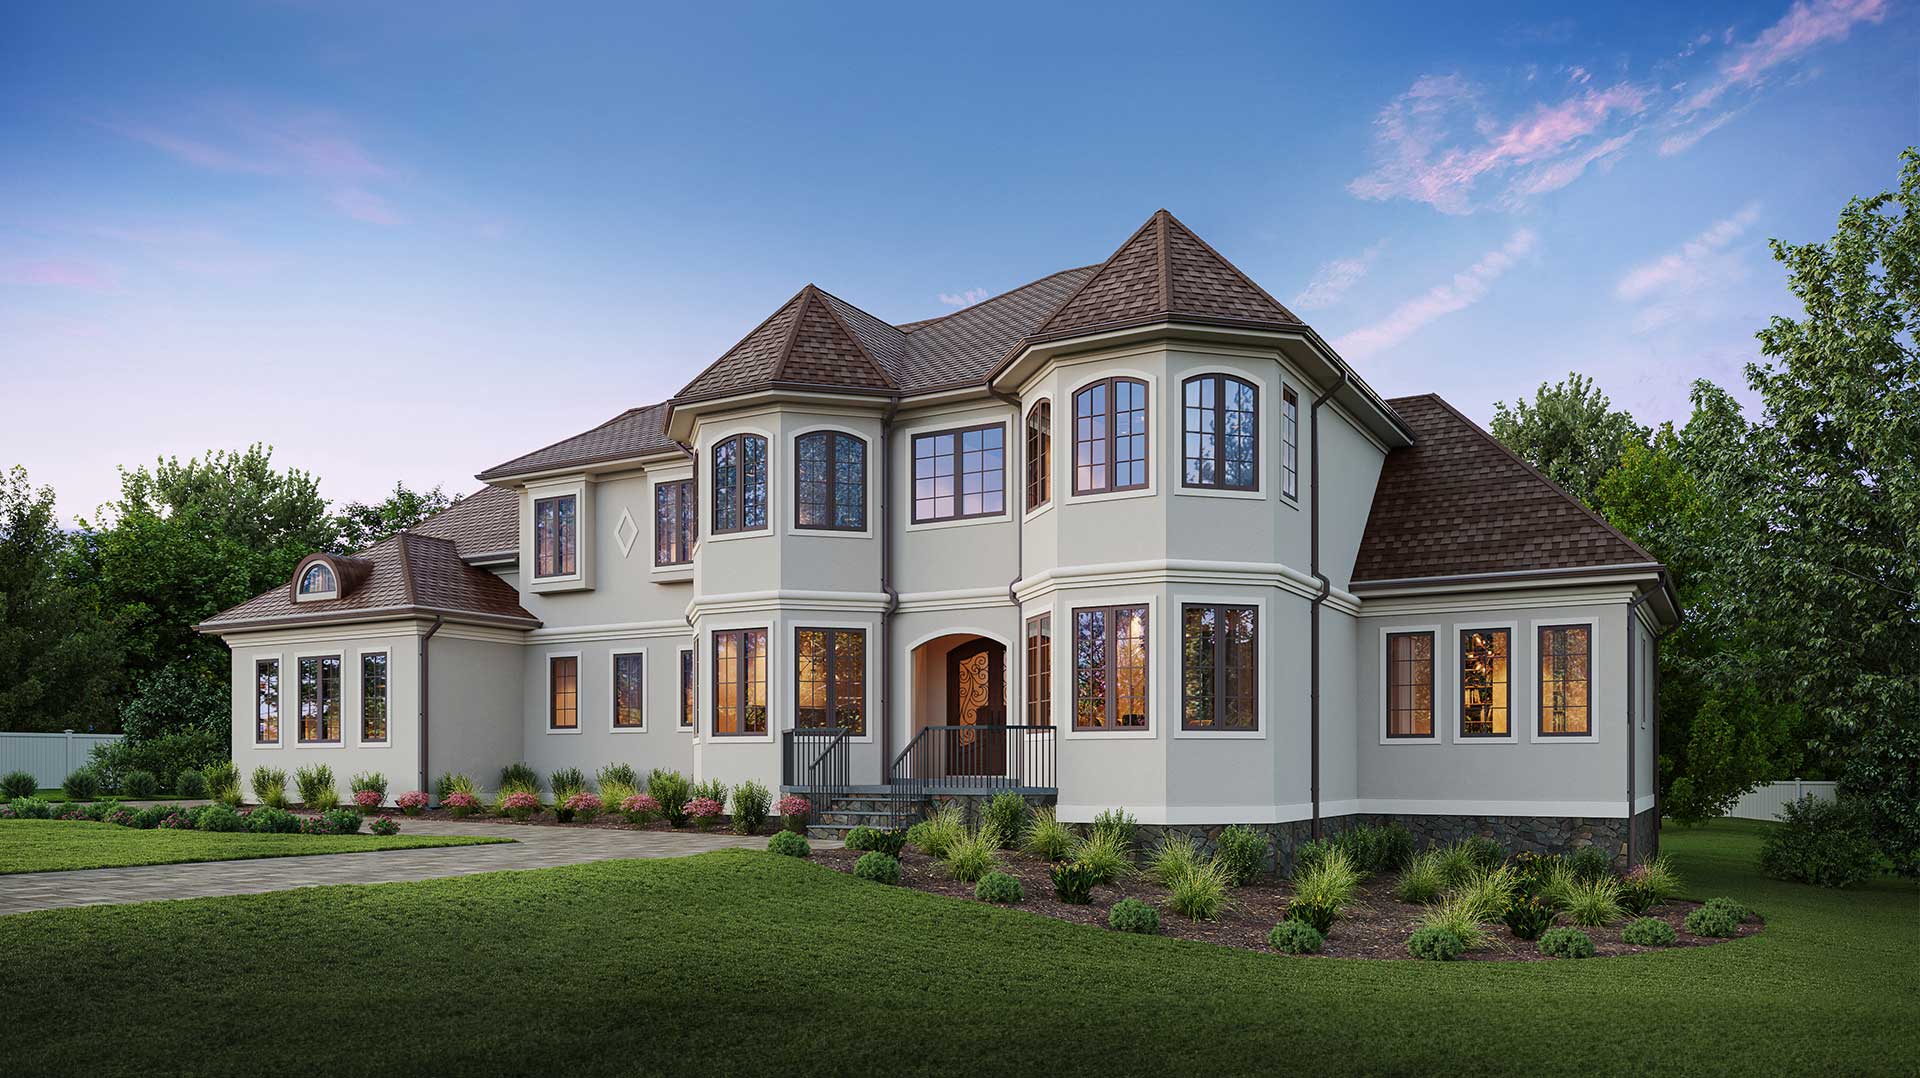 A mediterranean style front exterior in light beige stucco with brown windows and white trim.